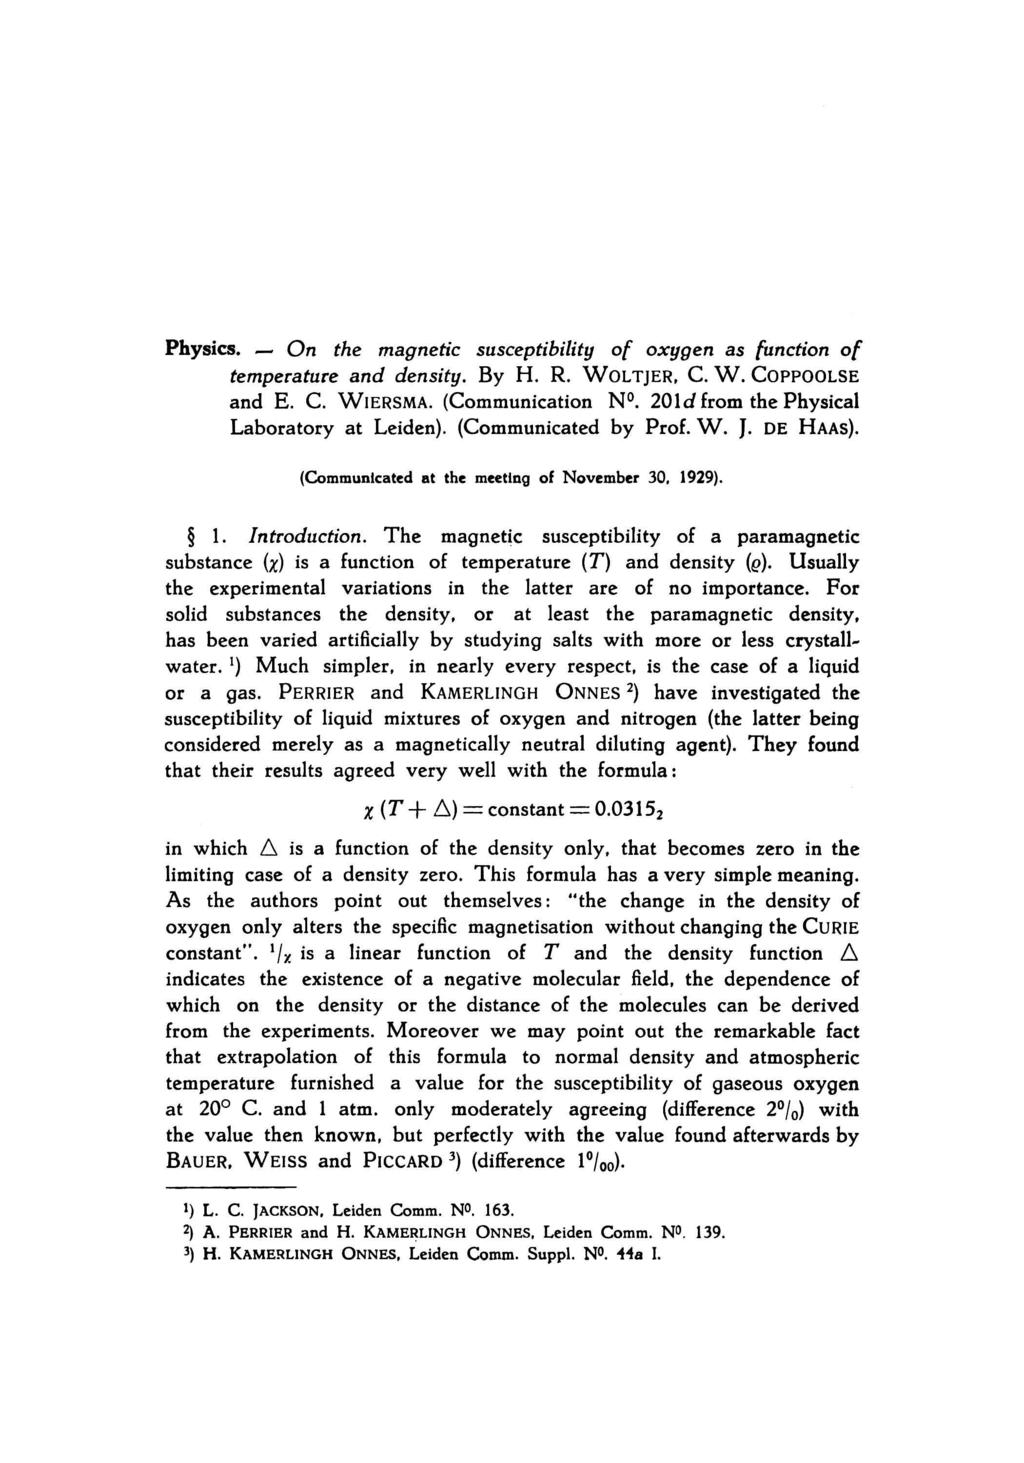 Physics. - On the magnetic susceptibility of oxygen as function of temperature and density. By H. R. WOLTJER. C. W. COPPOOLSE and E. C. WERSMA. (Communication N.